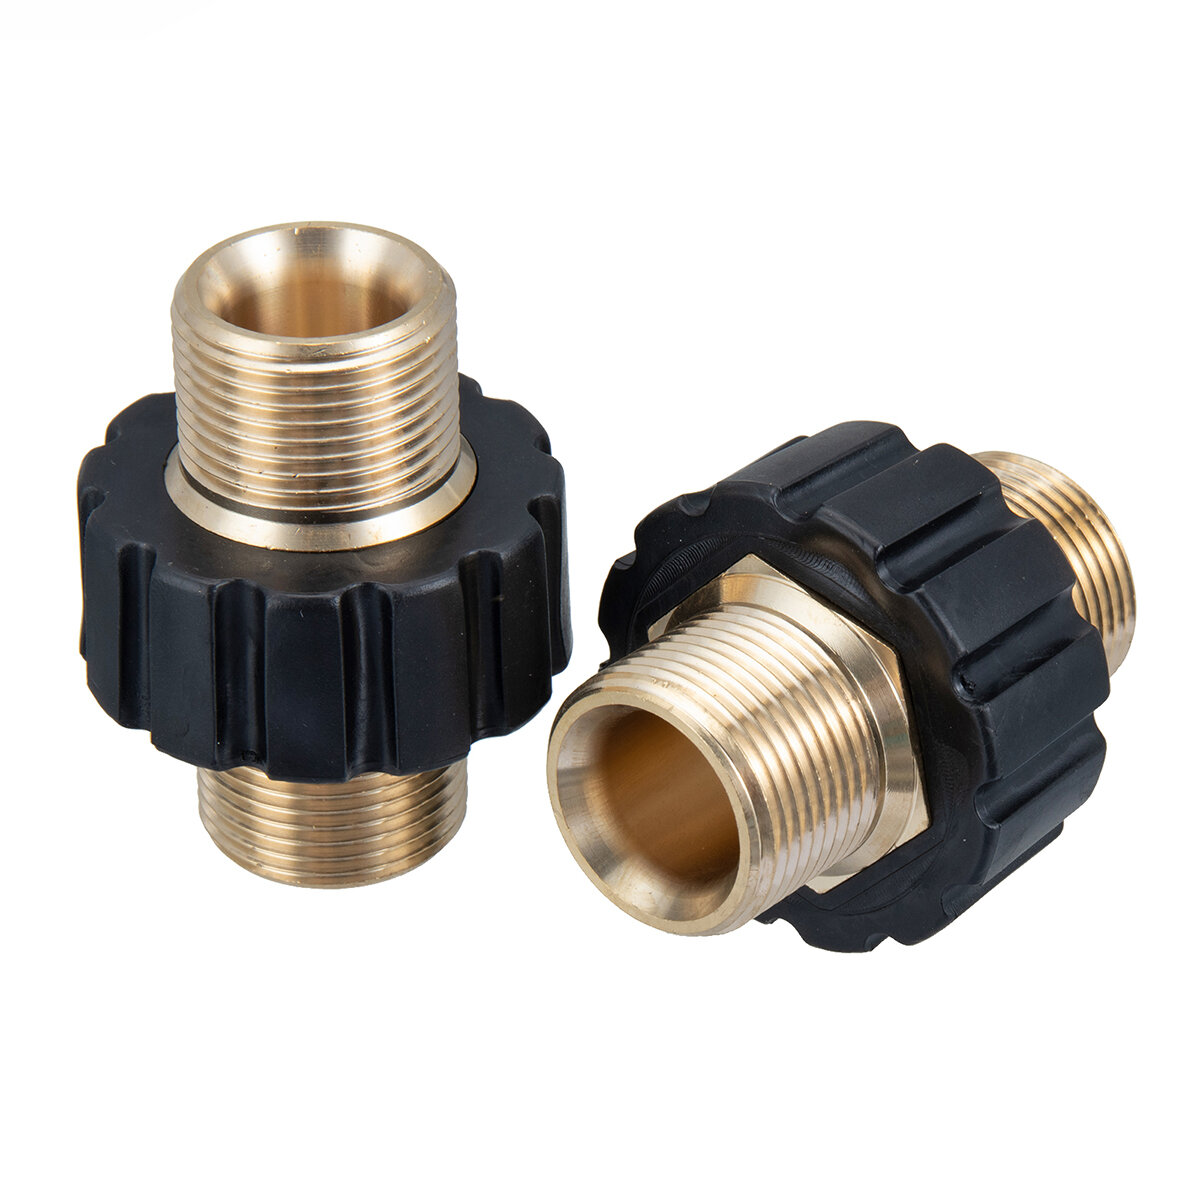 Garfans 2Pcs Pressure Washer Hose Connector CokdenM22-14mm Male Fitting Garden Outdoor